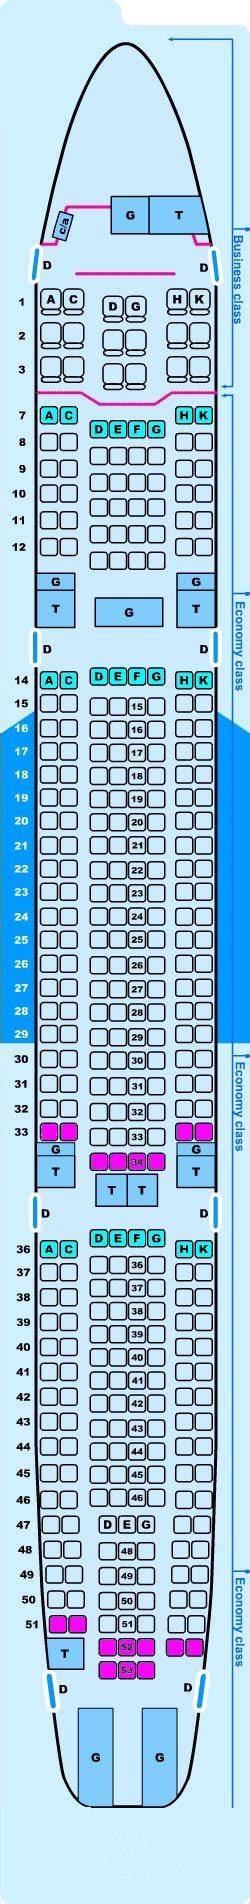 Airbus A330neo Seat Map Image To U